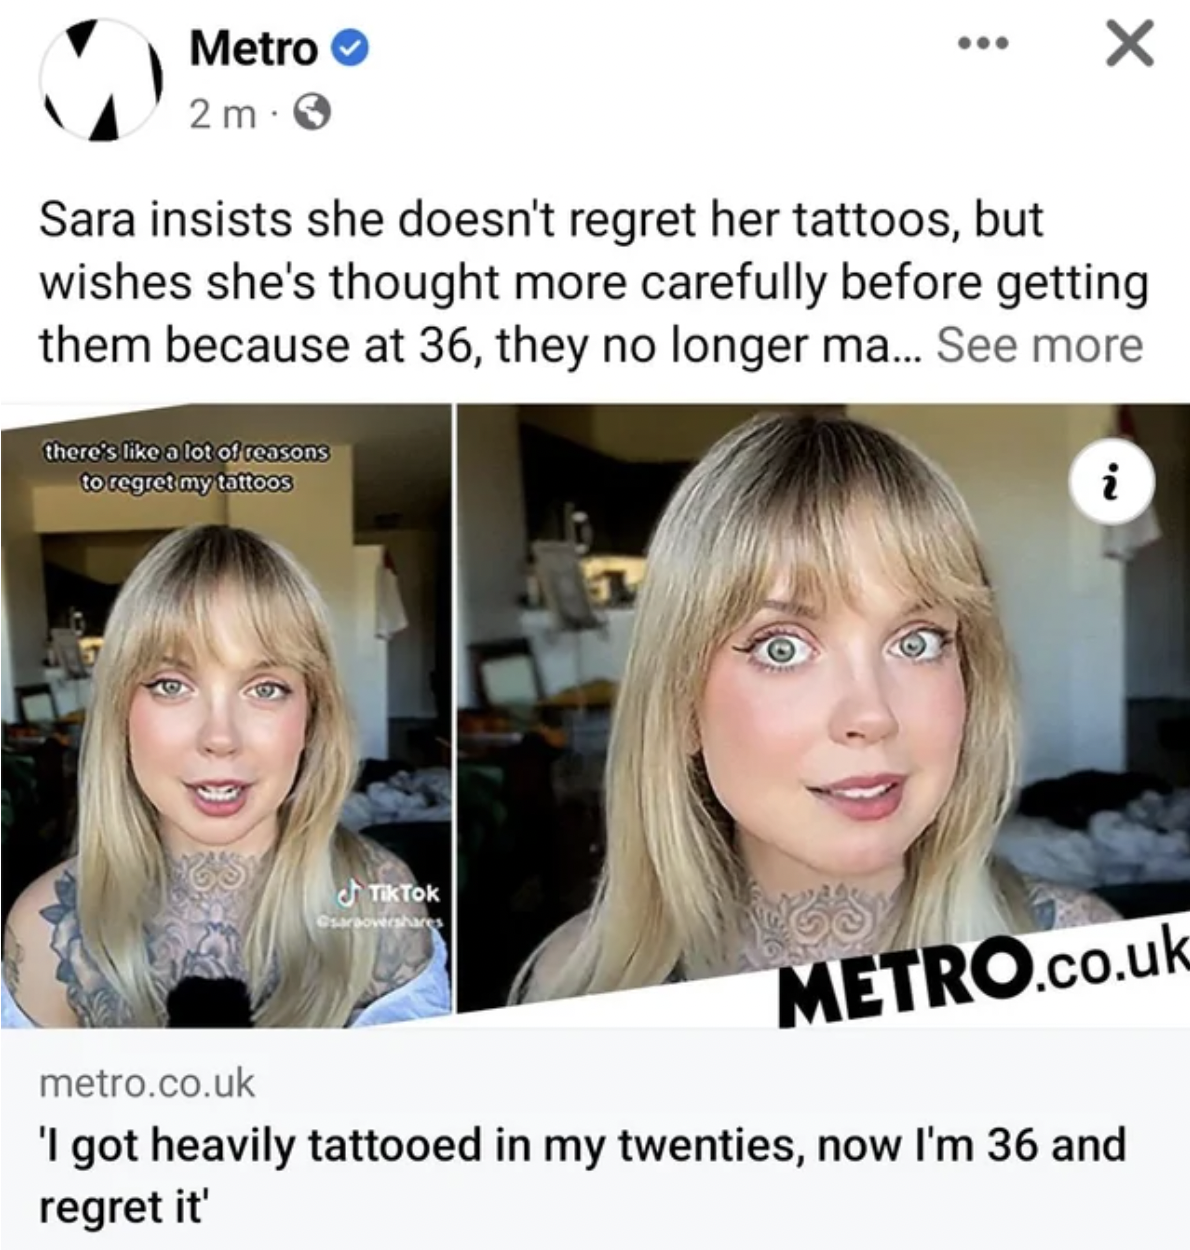 funny facepalms - blond - Sara insists she doesn't regret her tattoos, but wishes she's thought more carefully before getting them because at 36, they no longer ma... See more there's a lot of reasons to regret my tattoos X TikTok Metro.co.uk metro.co.uk